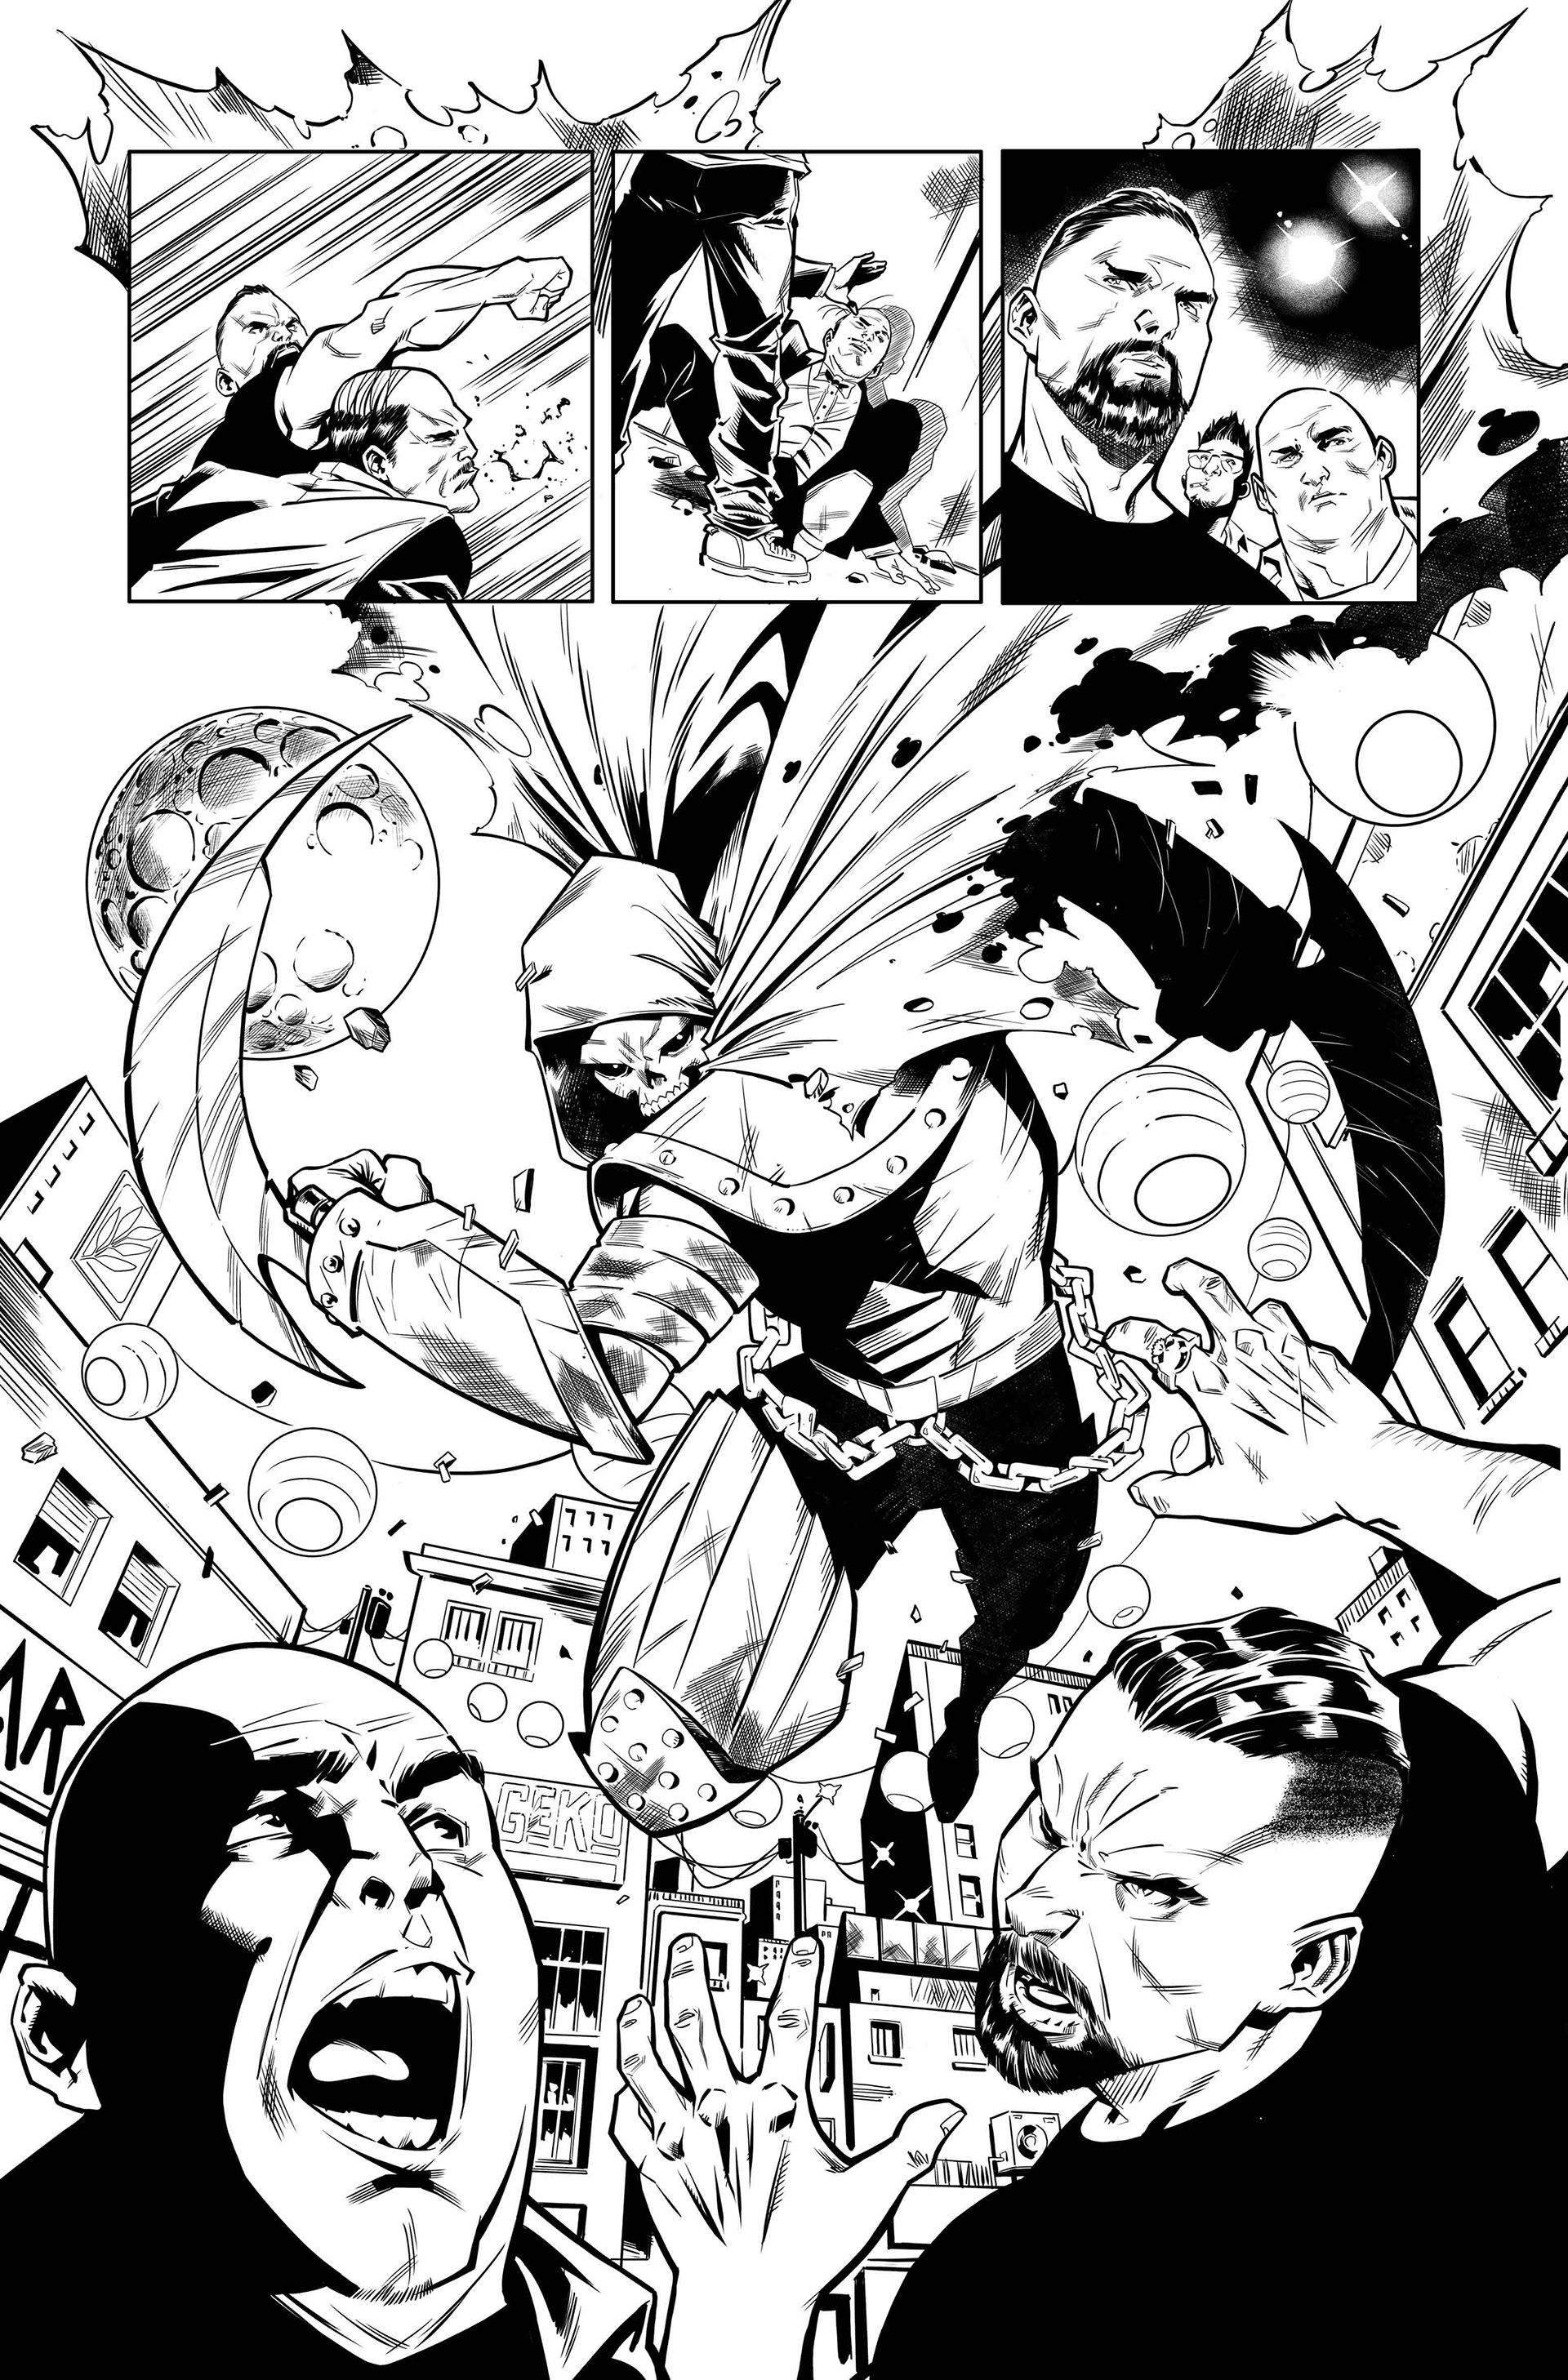 max raynor art - Batman lineart for Detective Comics #2 from 